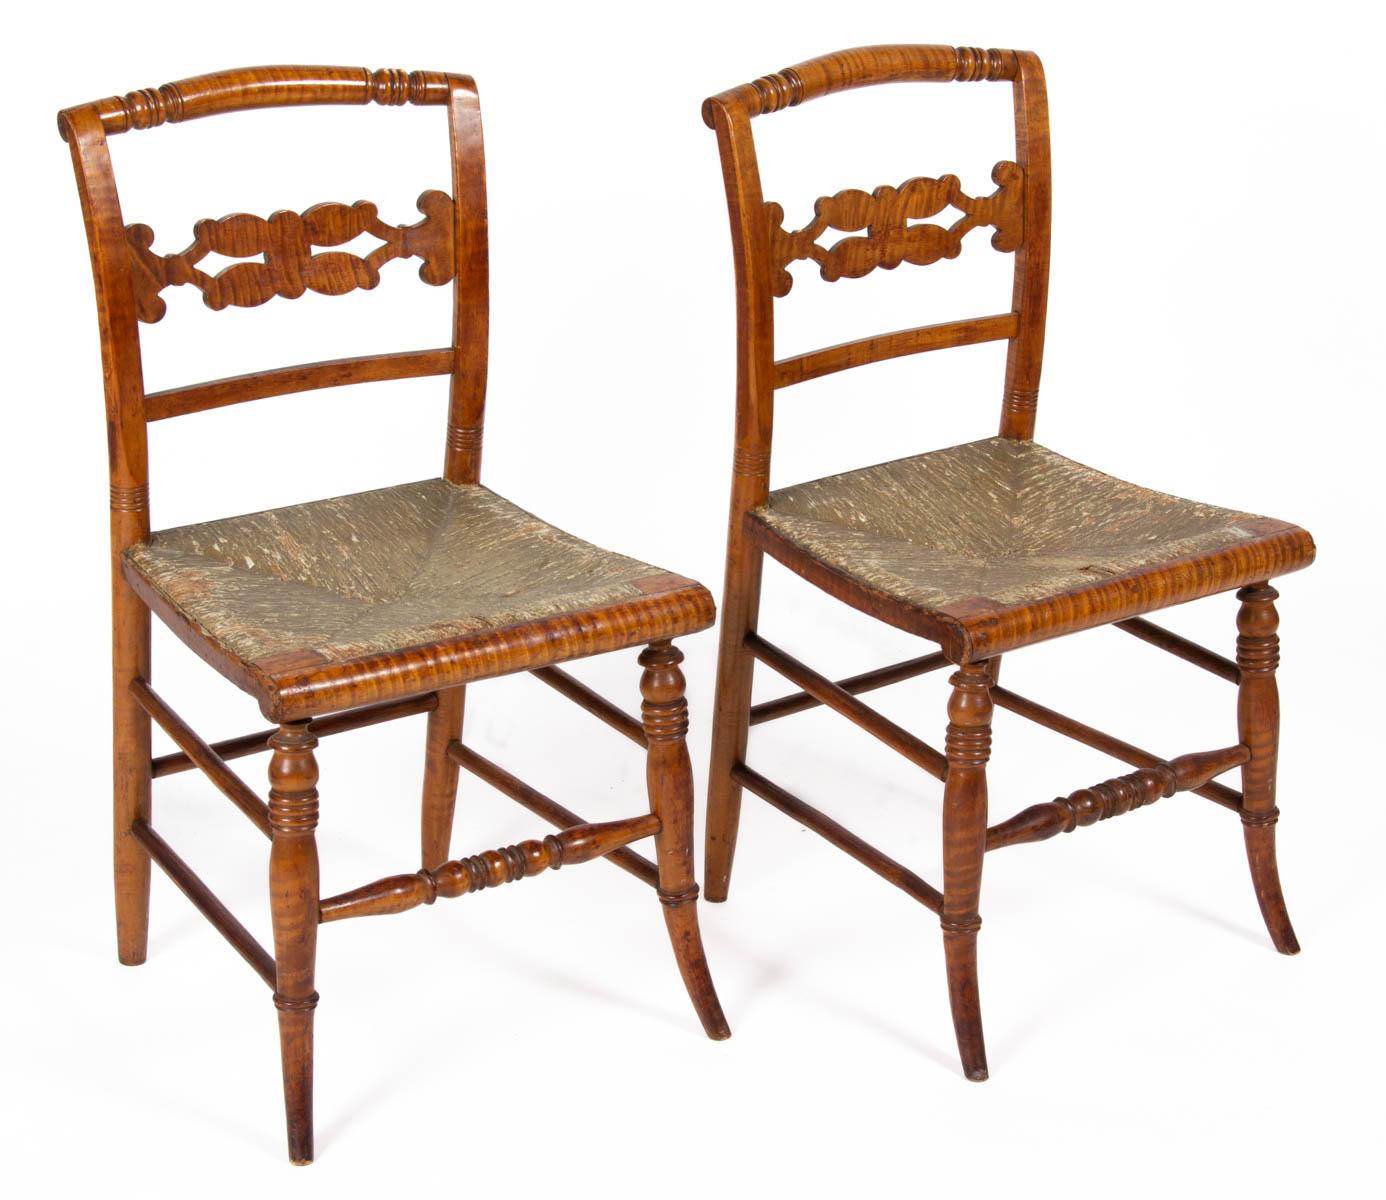 PAIR OF NEW YORK CLASSICAL TIGER MAPLE SIDE CHAIRS